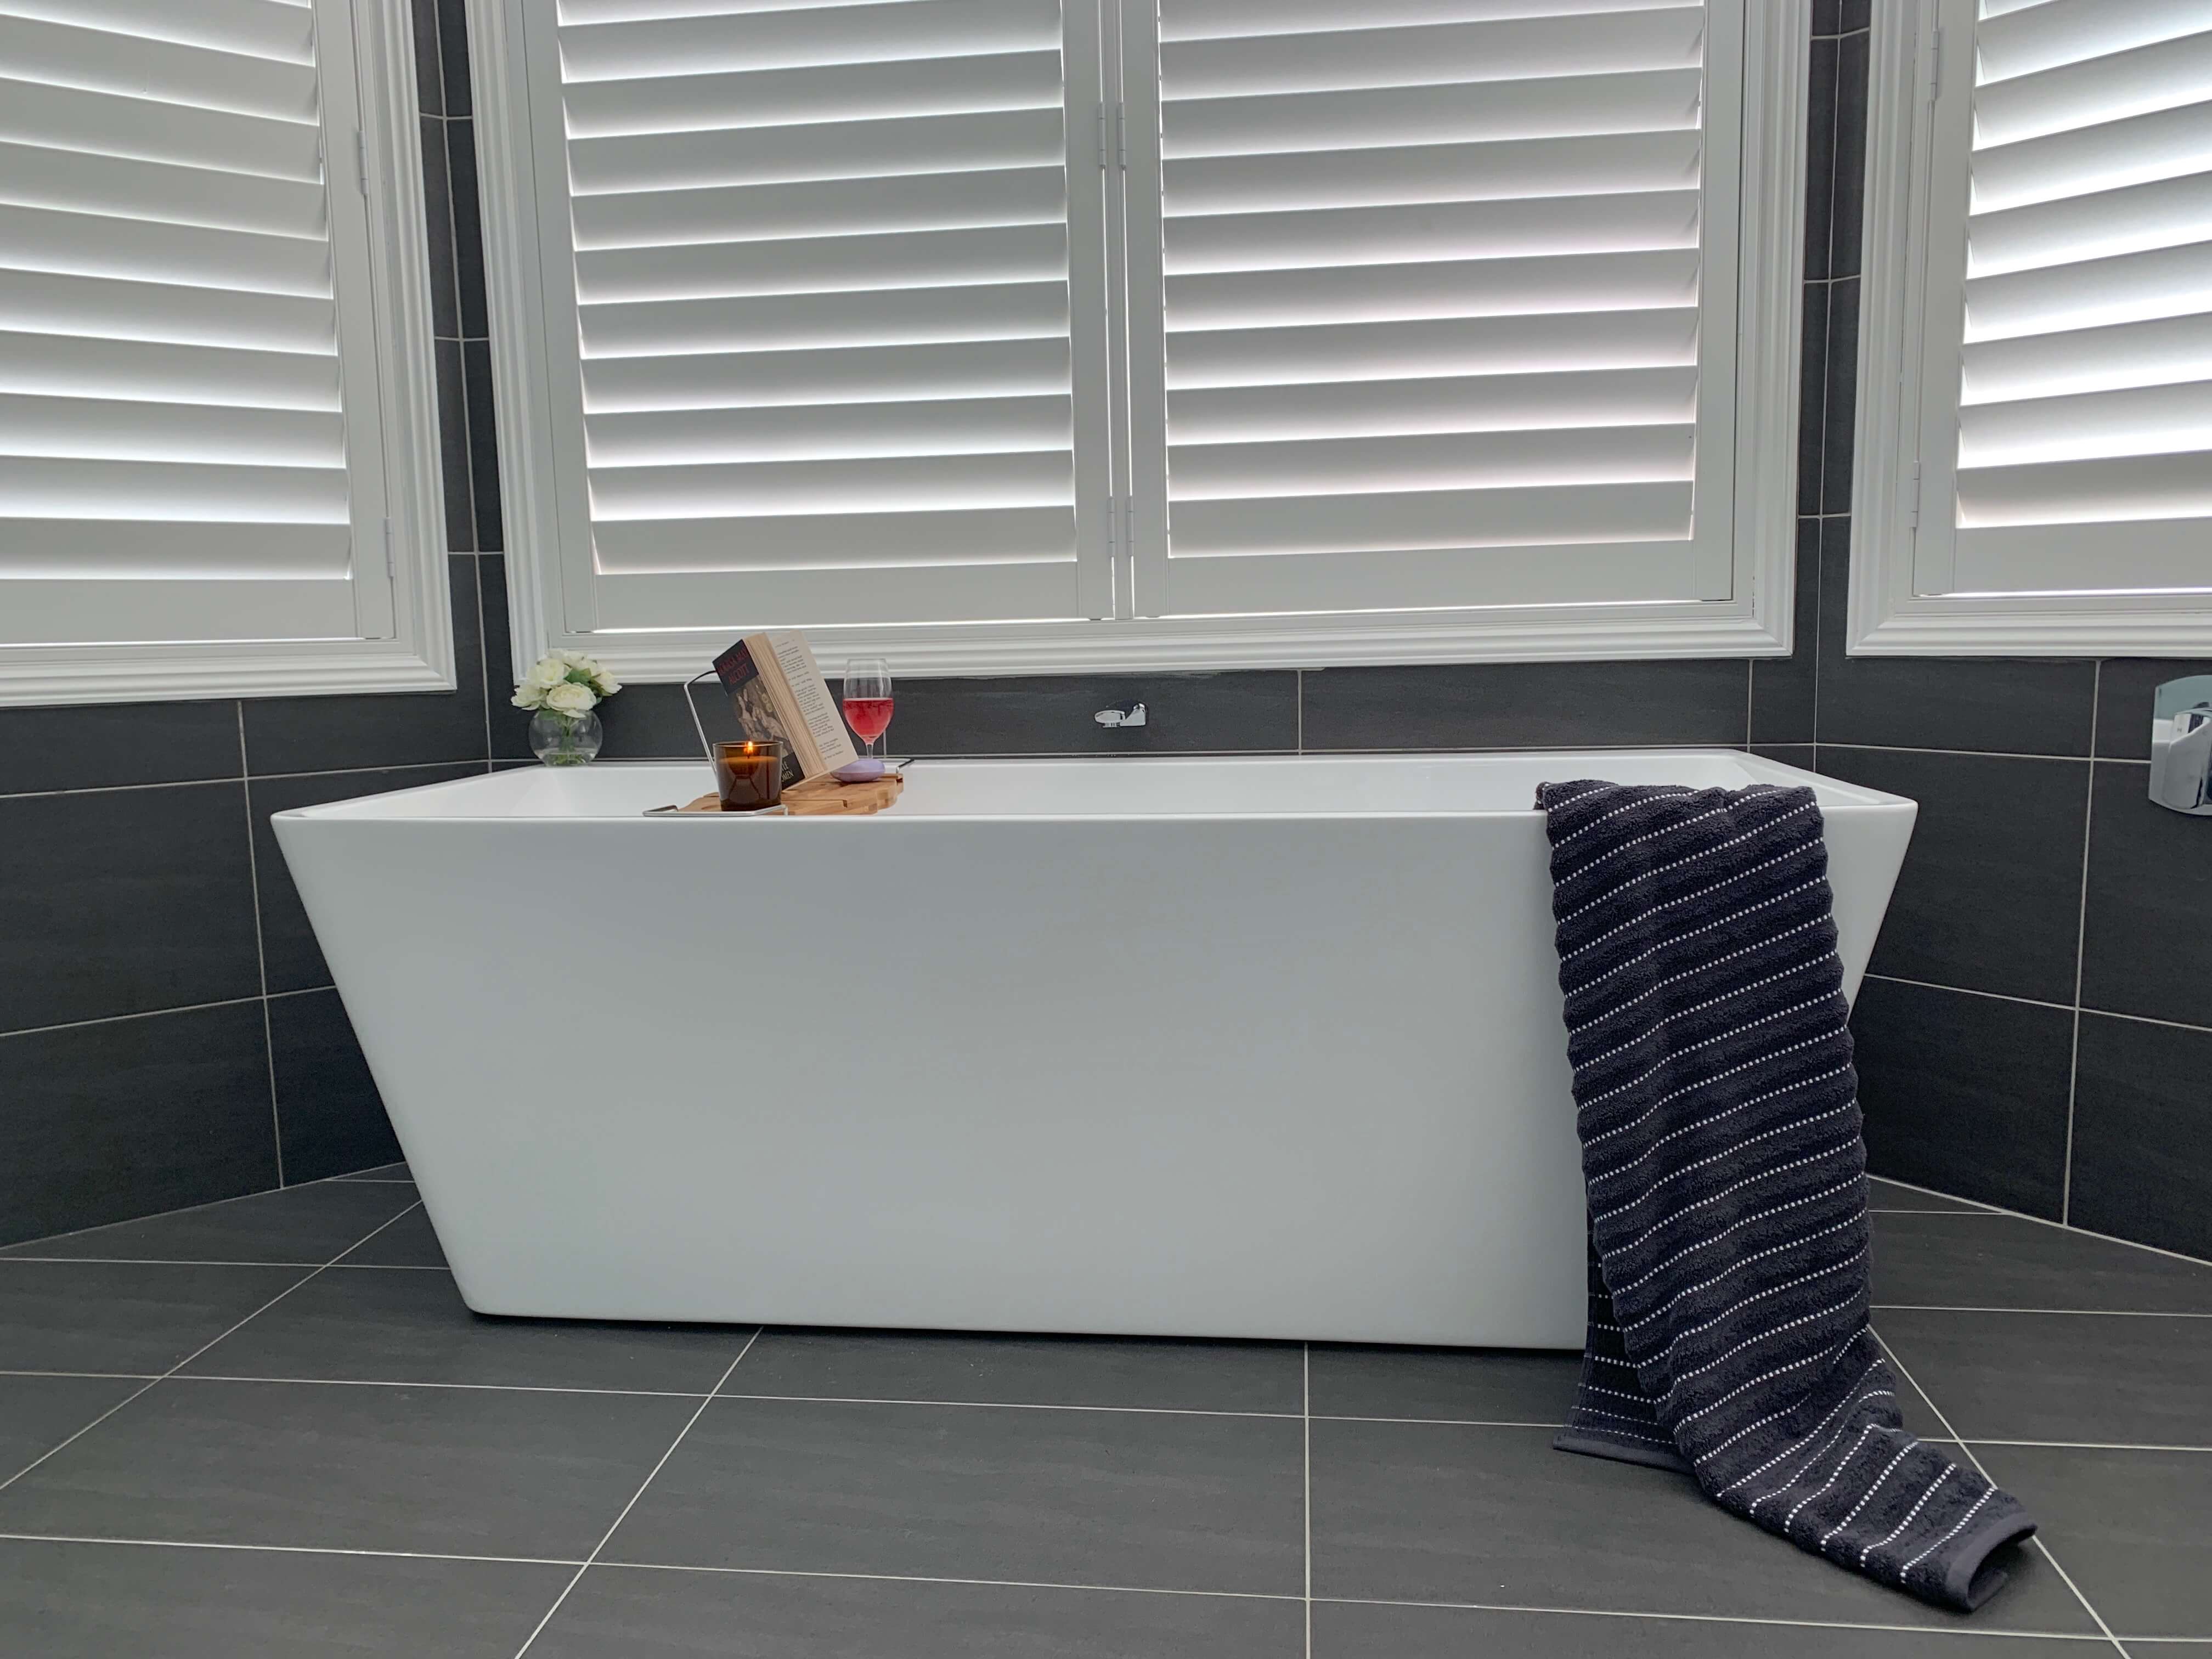 Stunning white back to wall free standing bath contrasting perfectly with the dark porcelain tiles - bathroom renovation by Master Bathrooms & Kitchens.